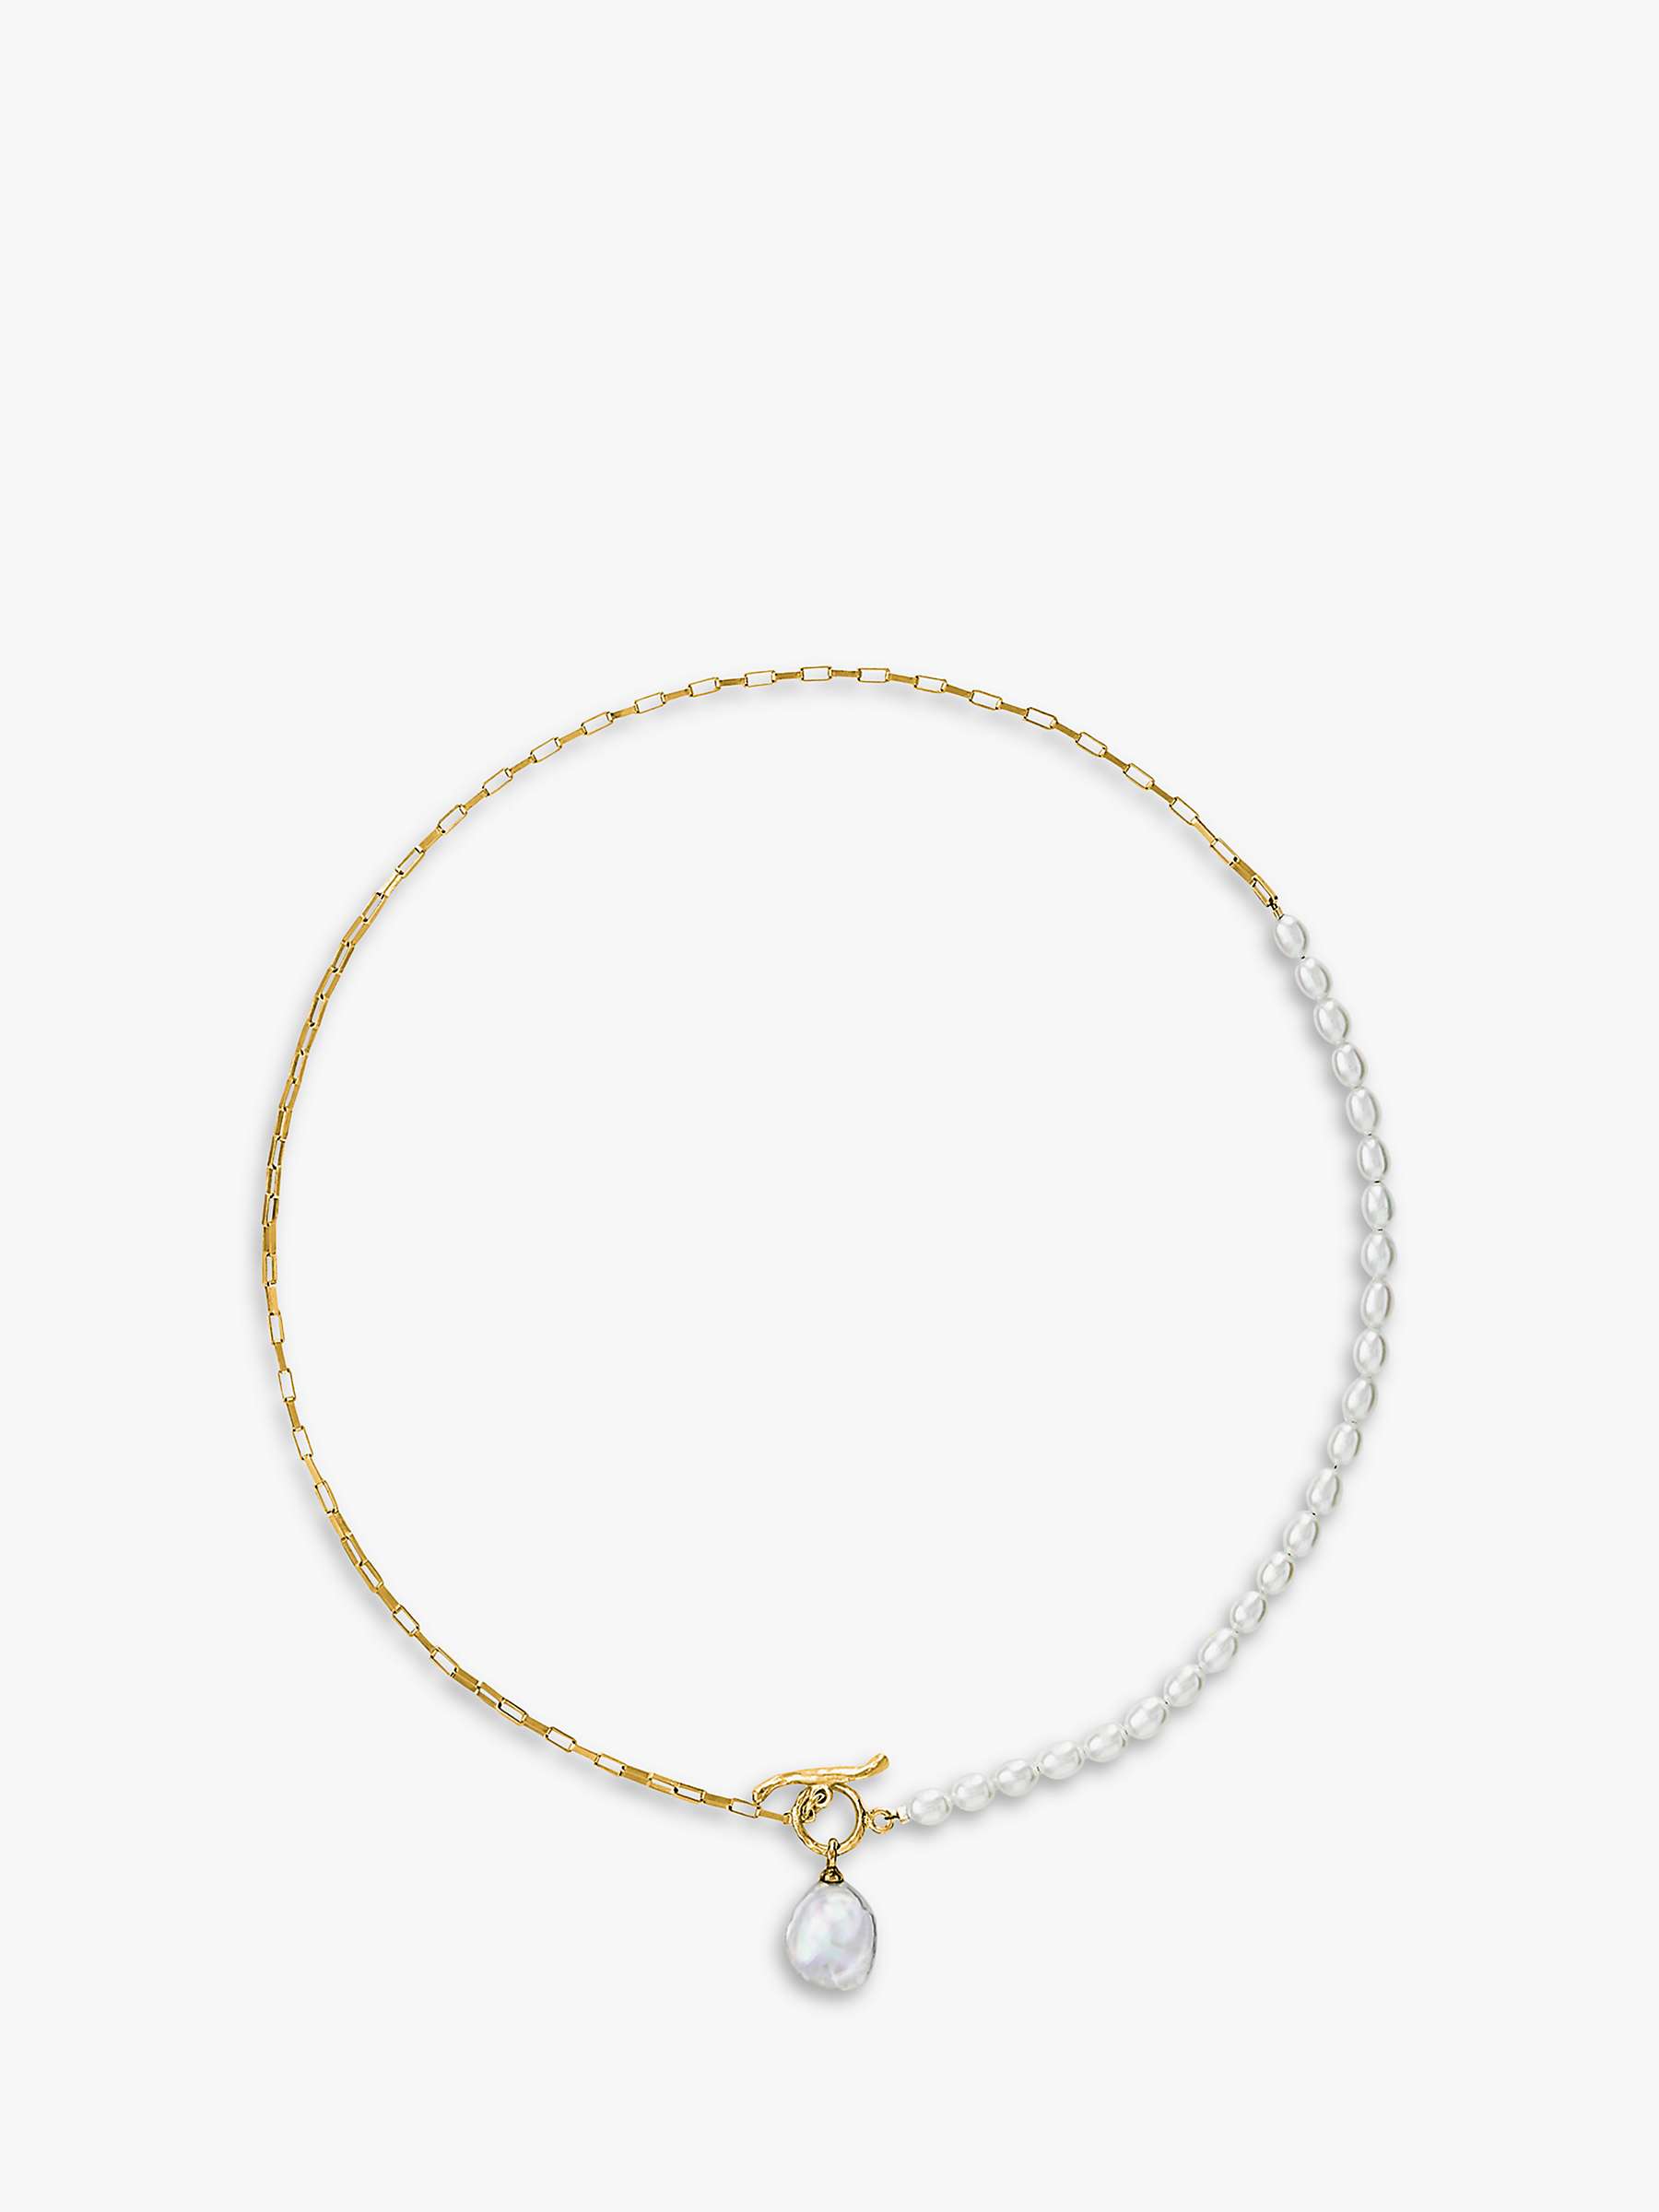 Buy Dower & Hall Keshi Pearl and Chain Necklace, Gold/White Online at johnlewis.com